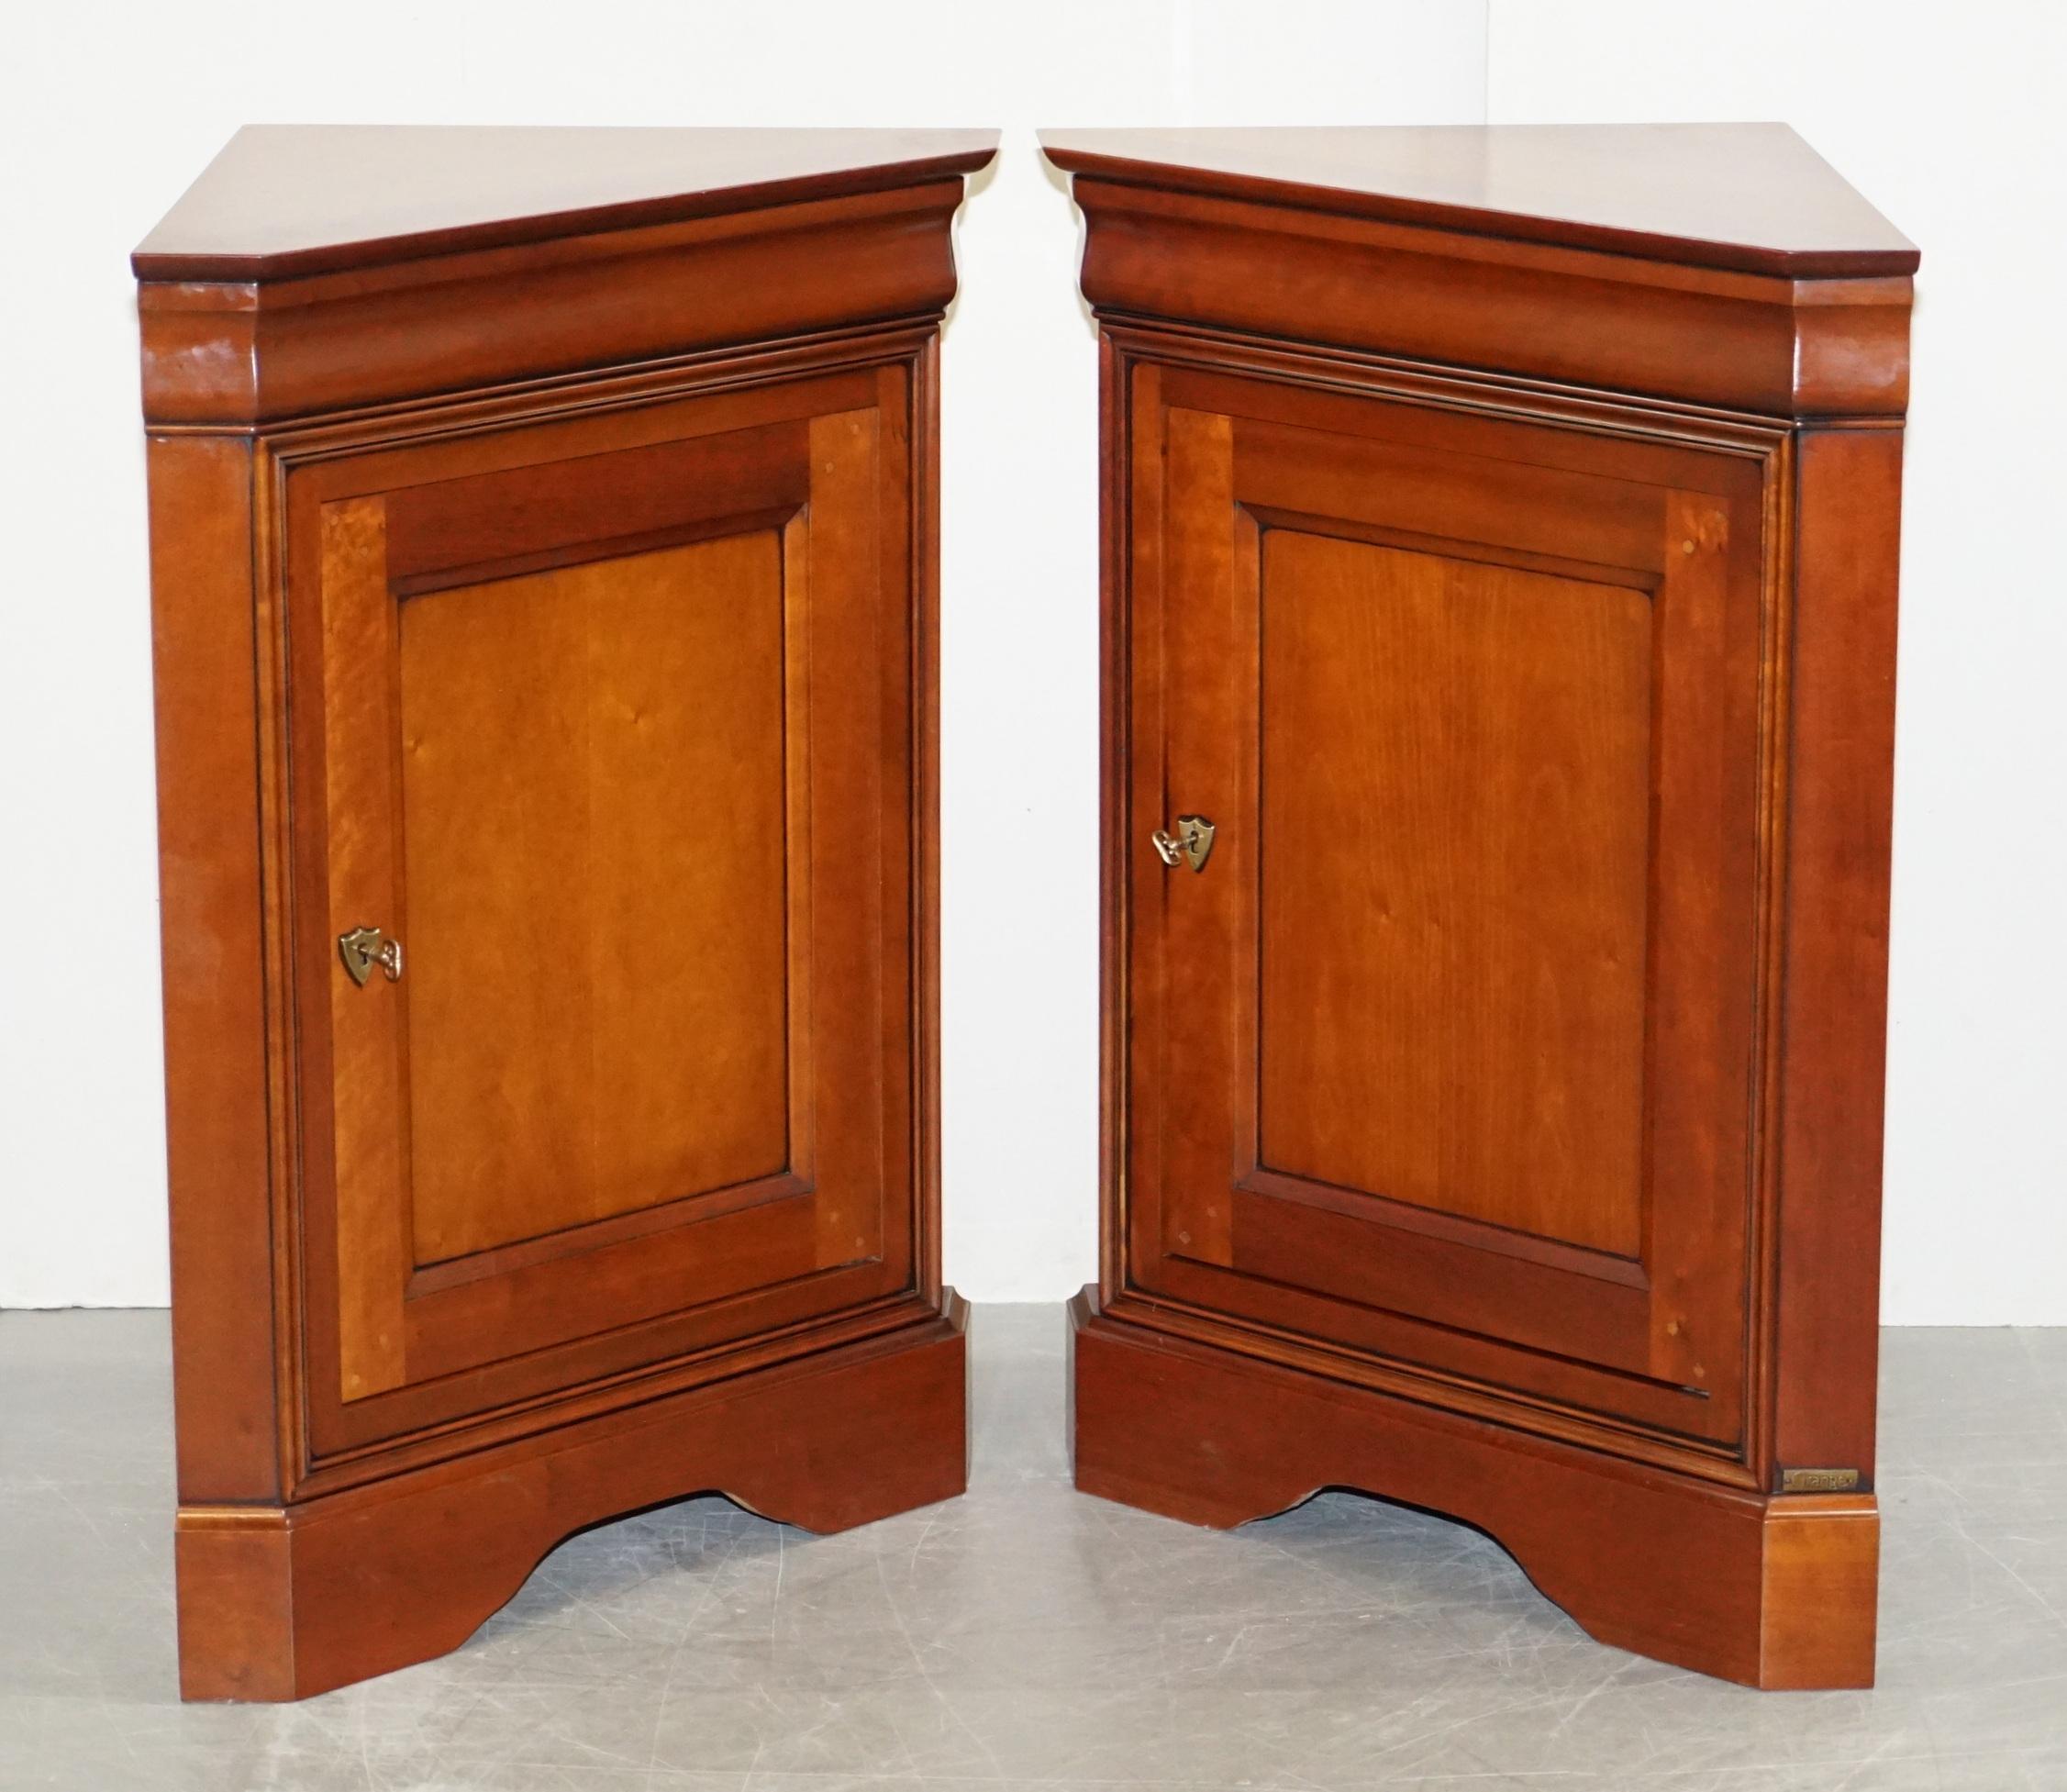 We are delighted to offer for sale this lovely pair of Grange Paris hand made in France cherrywood side cupboards

A good looking and well made pair, they are all solid cherrywood which is a hard timber with a lovely rich glow to it

We have